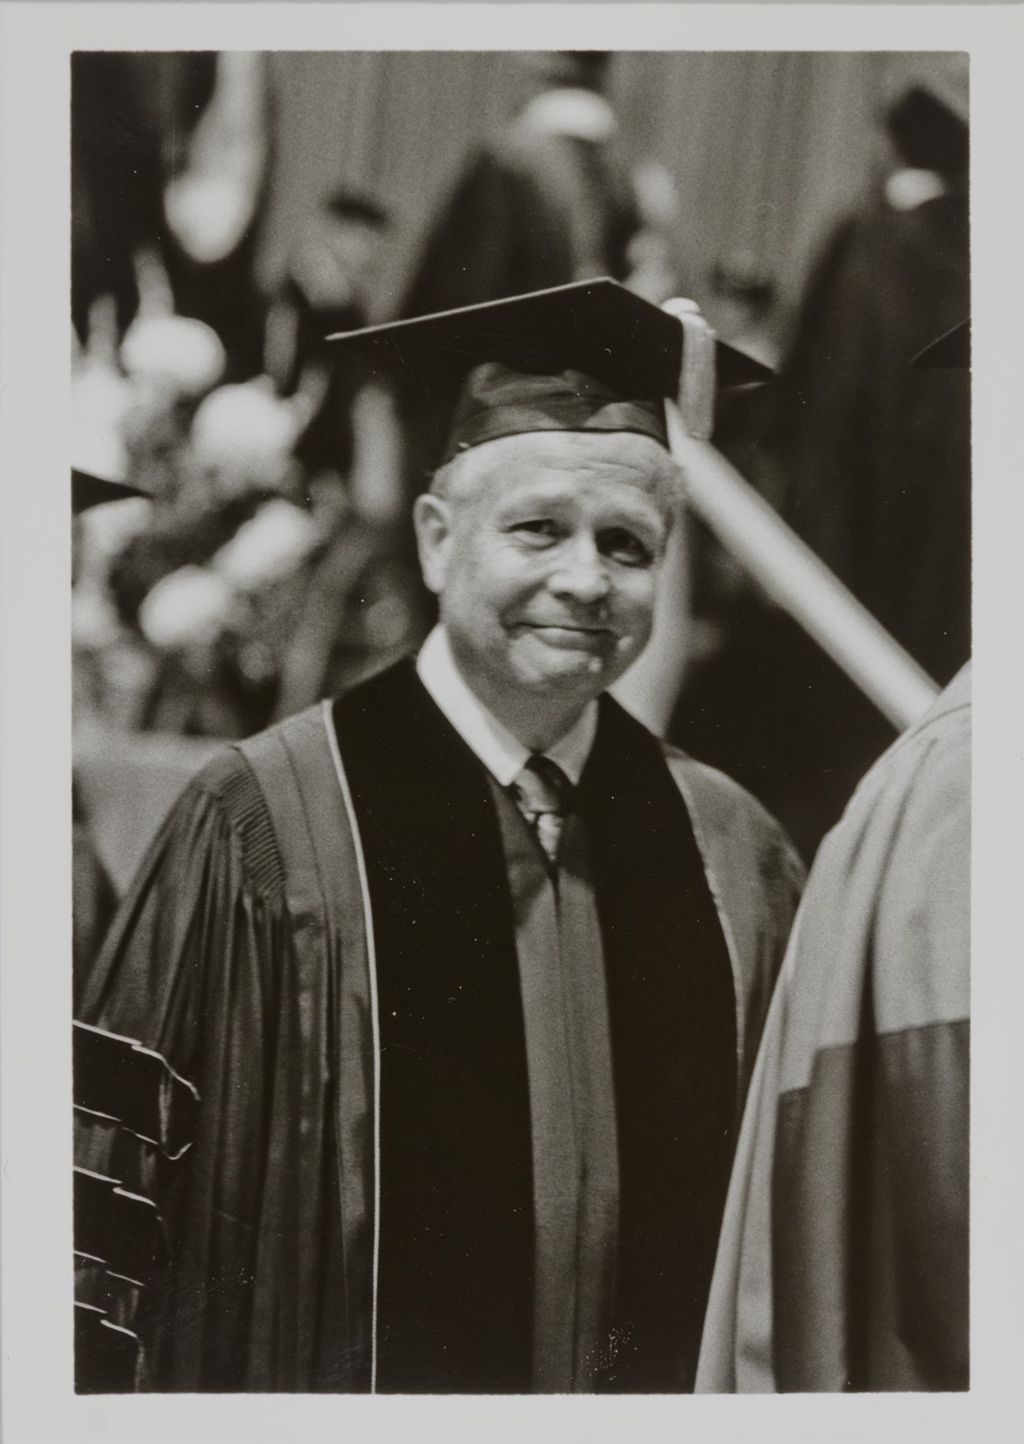 University of Illinois Board of Trustees member Dean Matter at the graduation ceremony